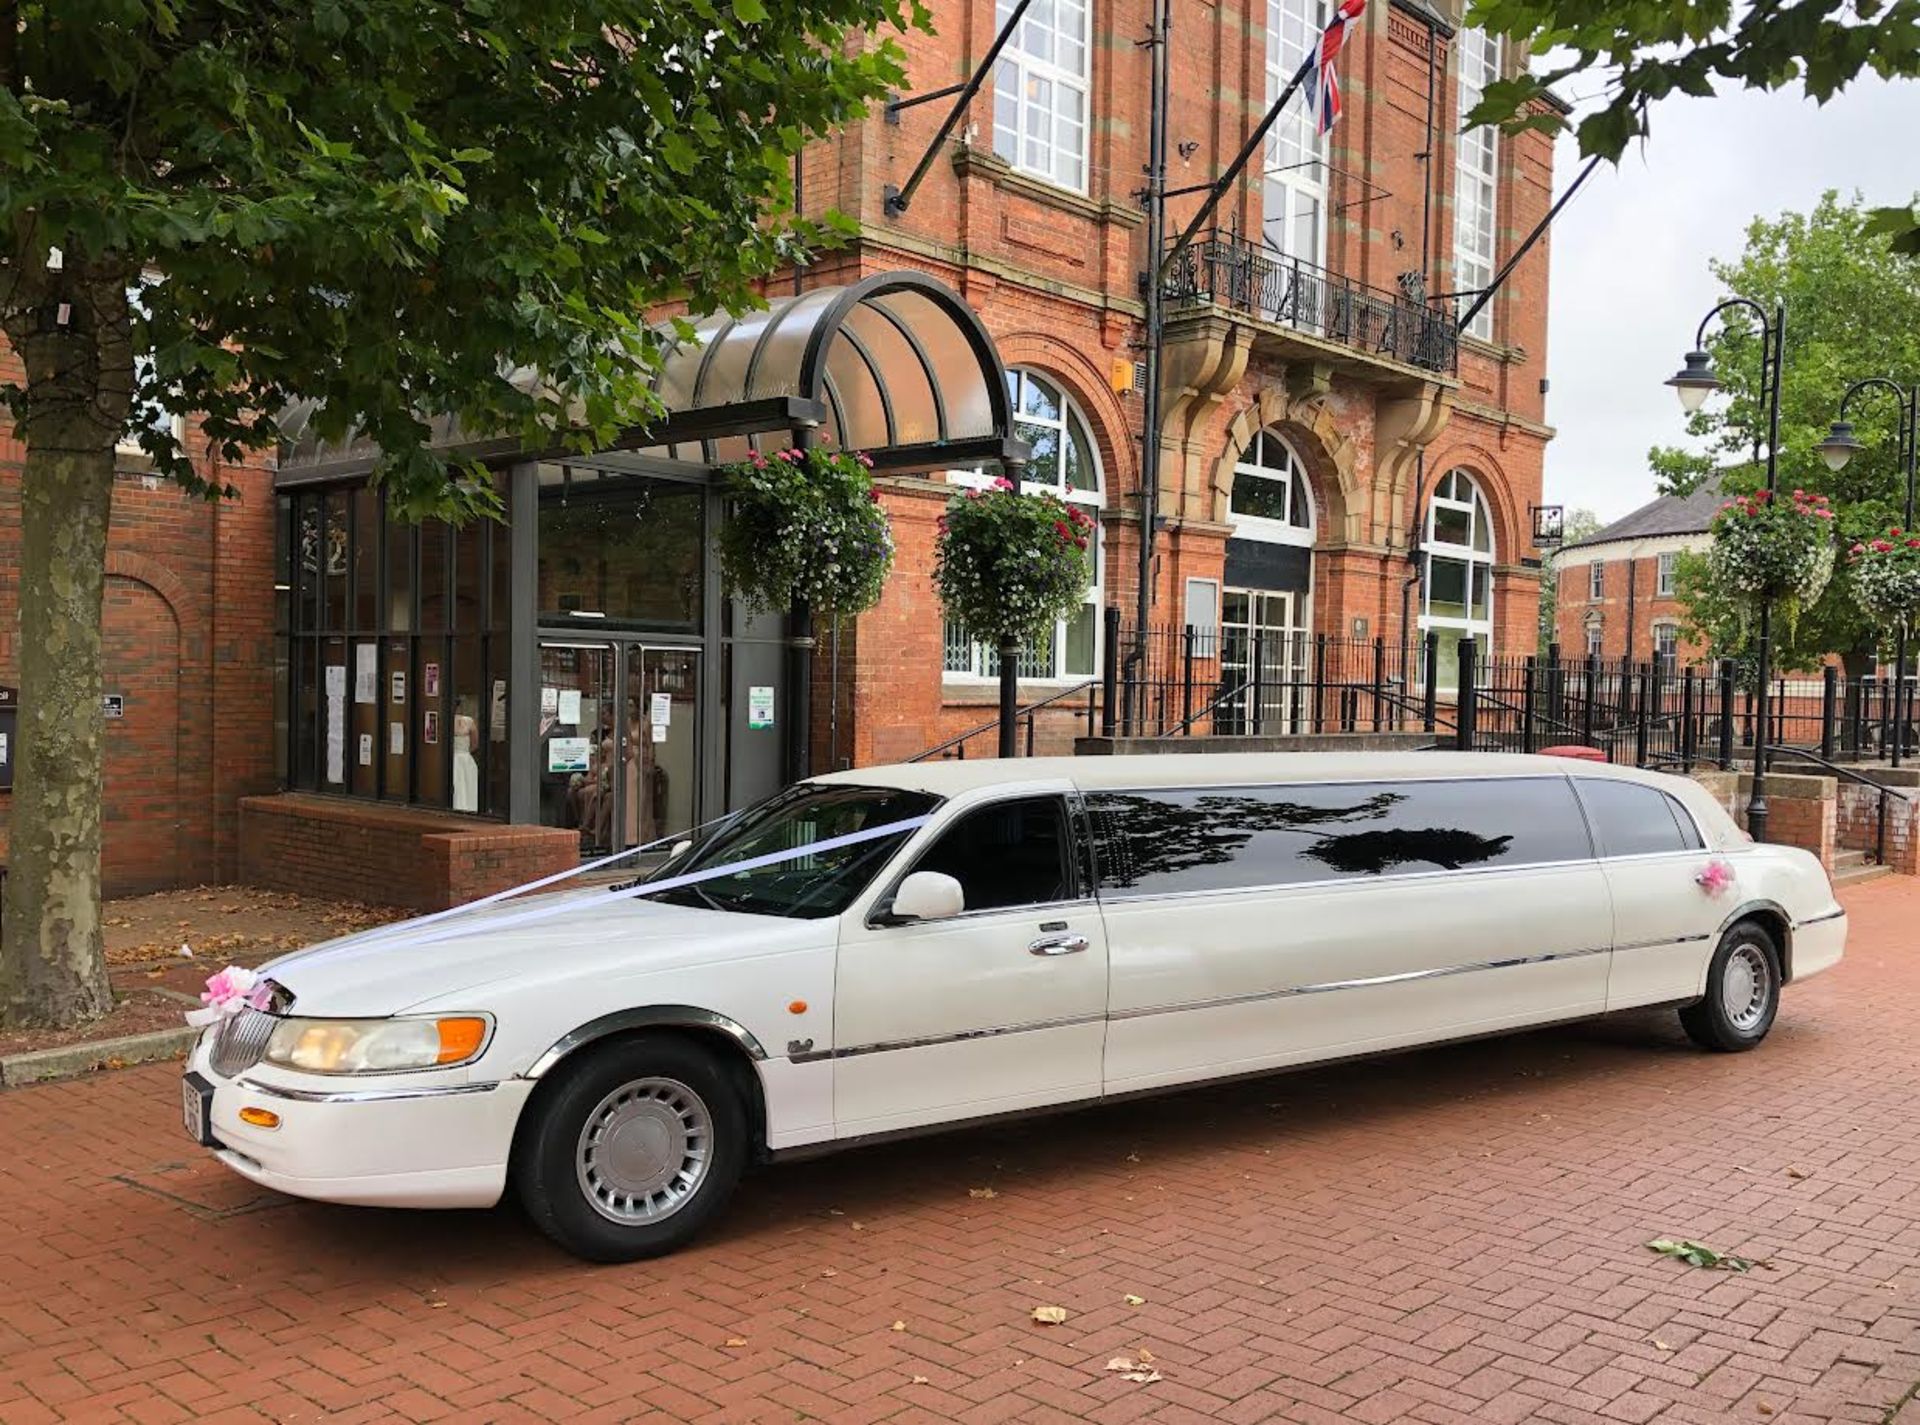 2001 LINCOLN TOWN CAR AUTO WHITE 10 SEATER LIMOUSINE WEDDING CAR *NO VAT* - Image 2 of 17